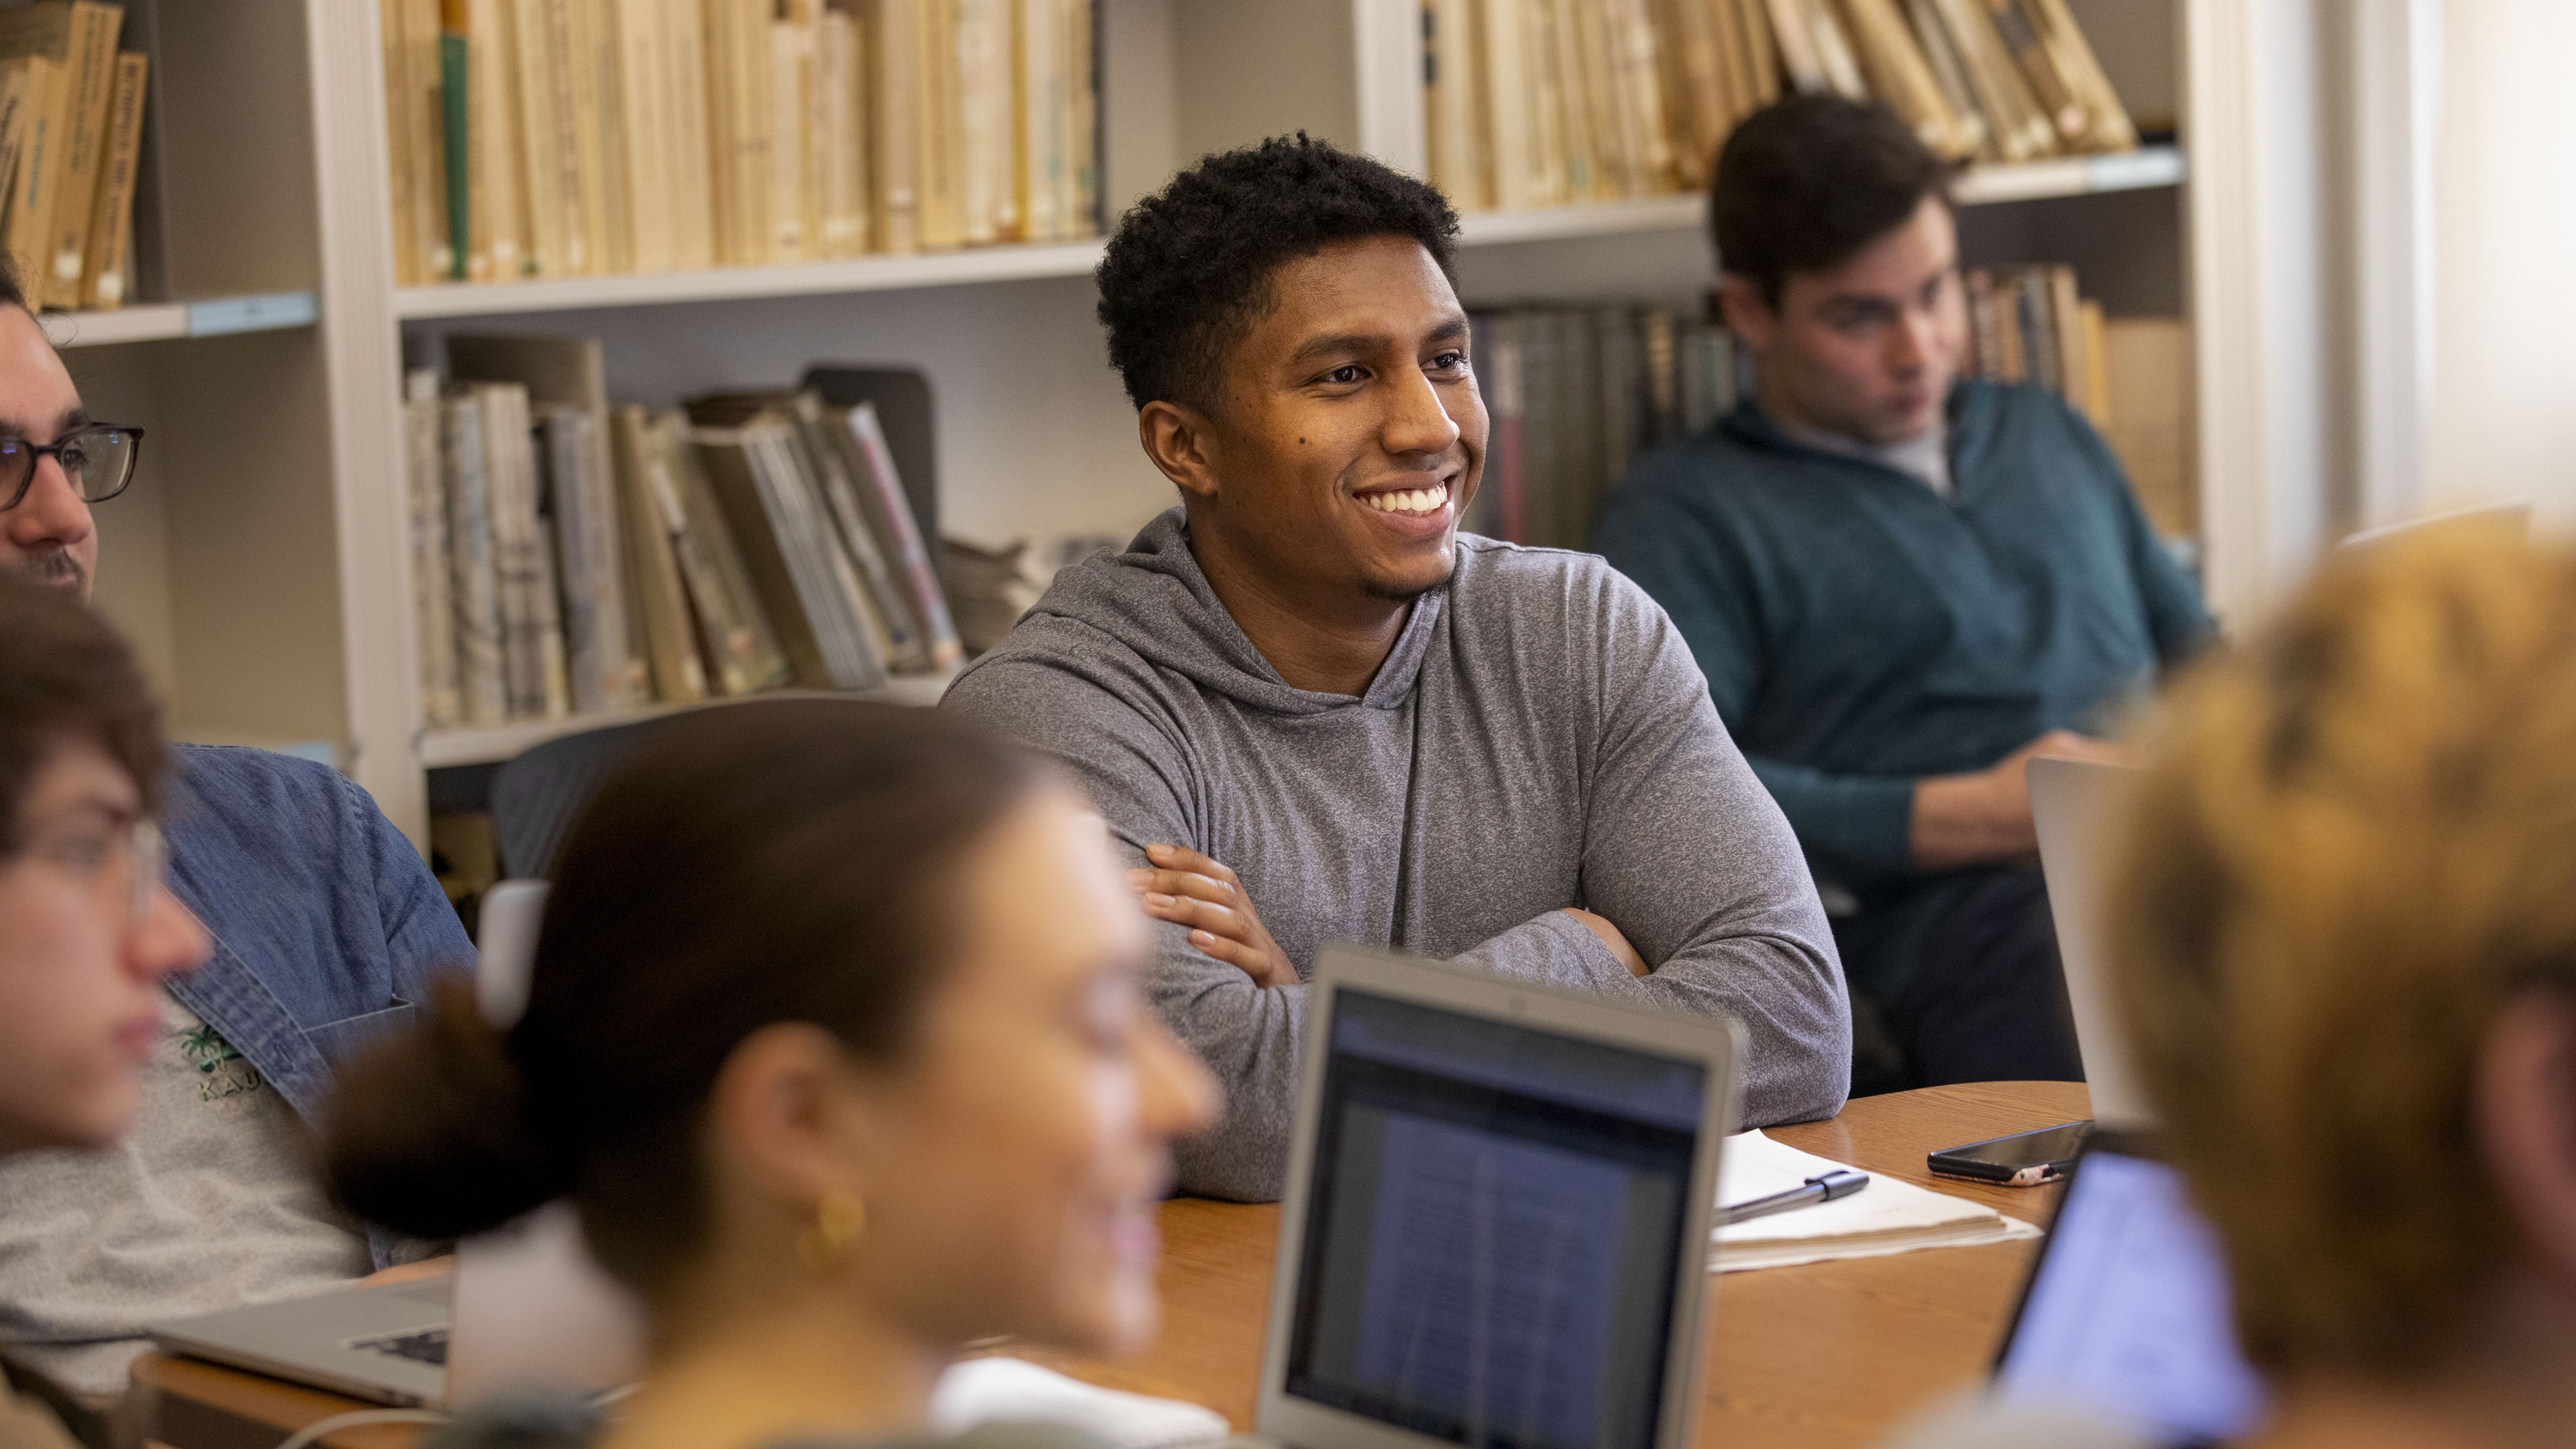 Brown University student happily engaged in a classroom